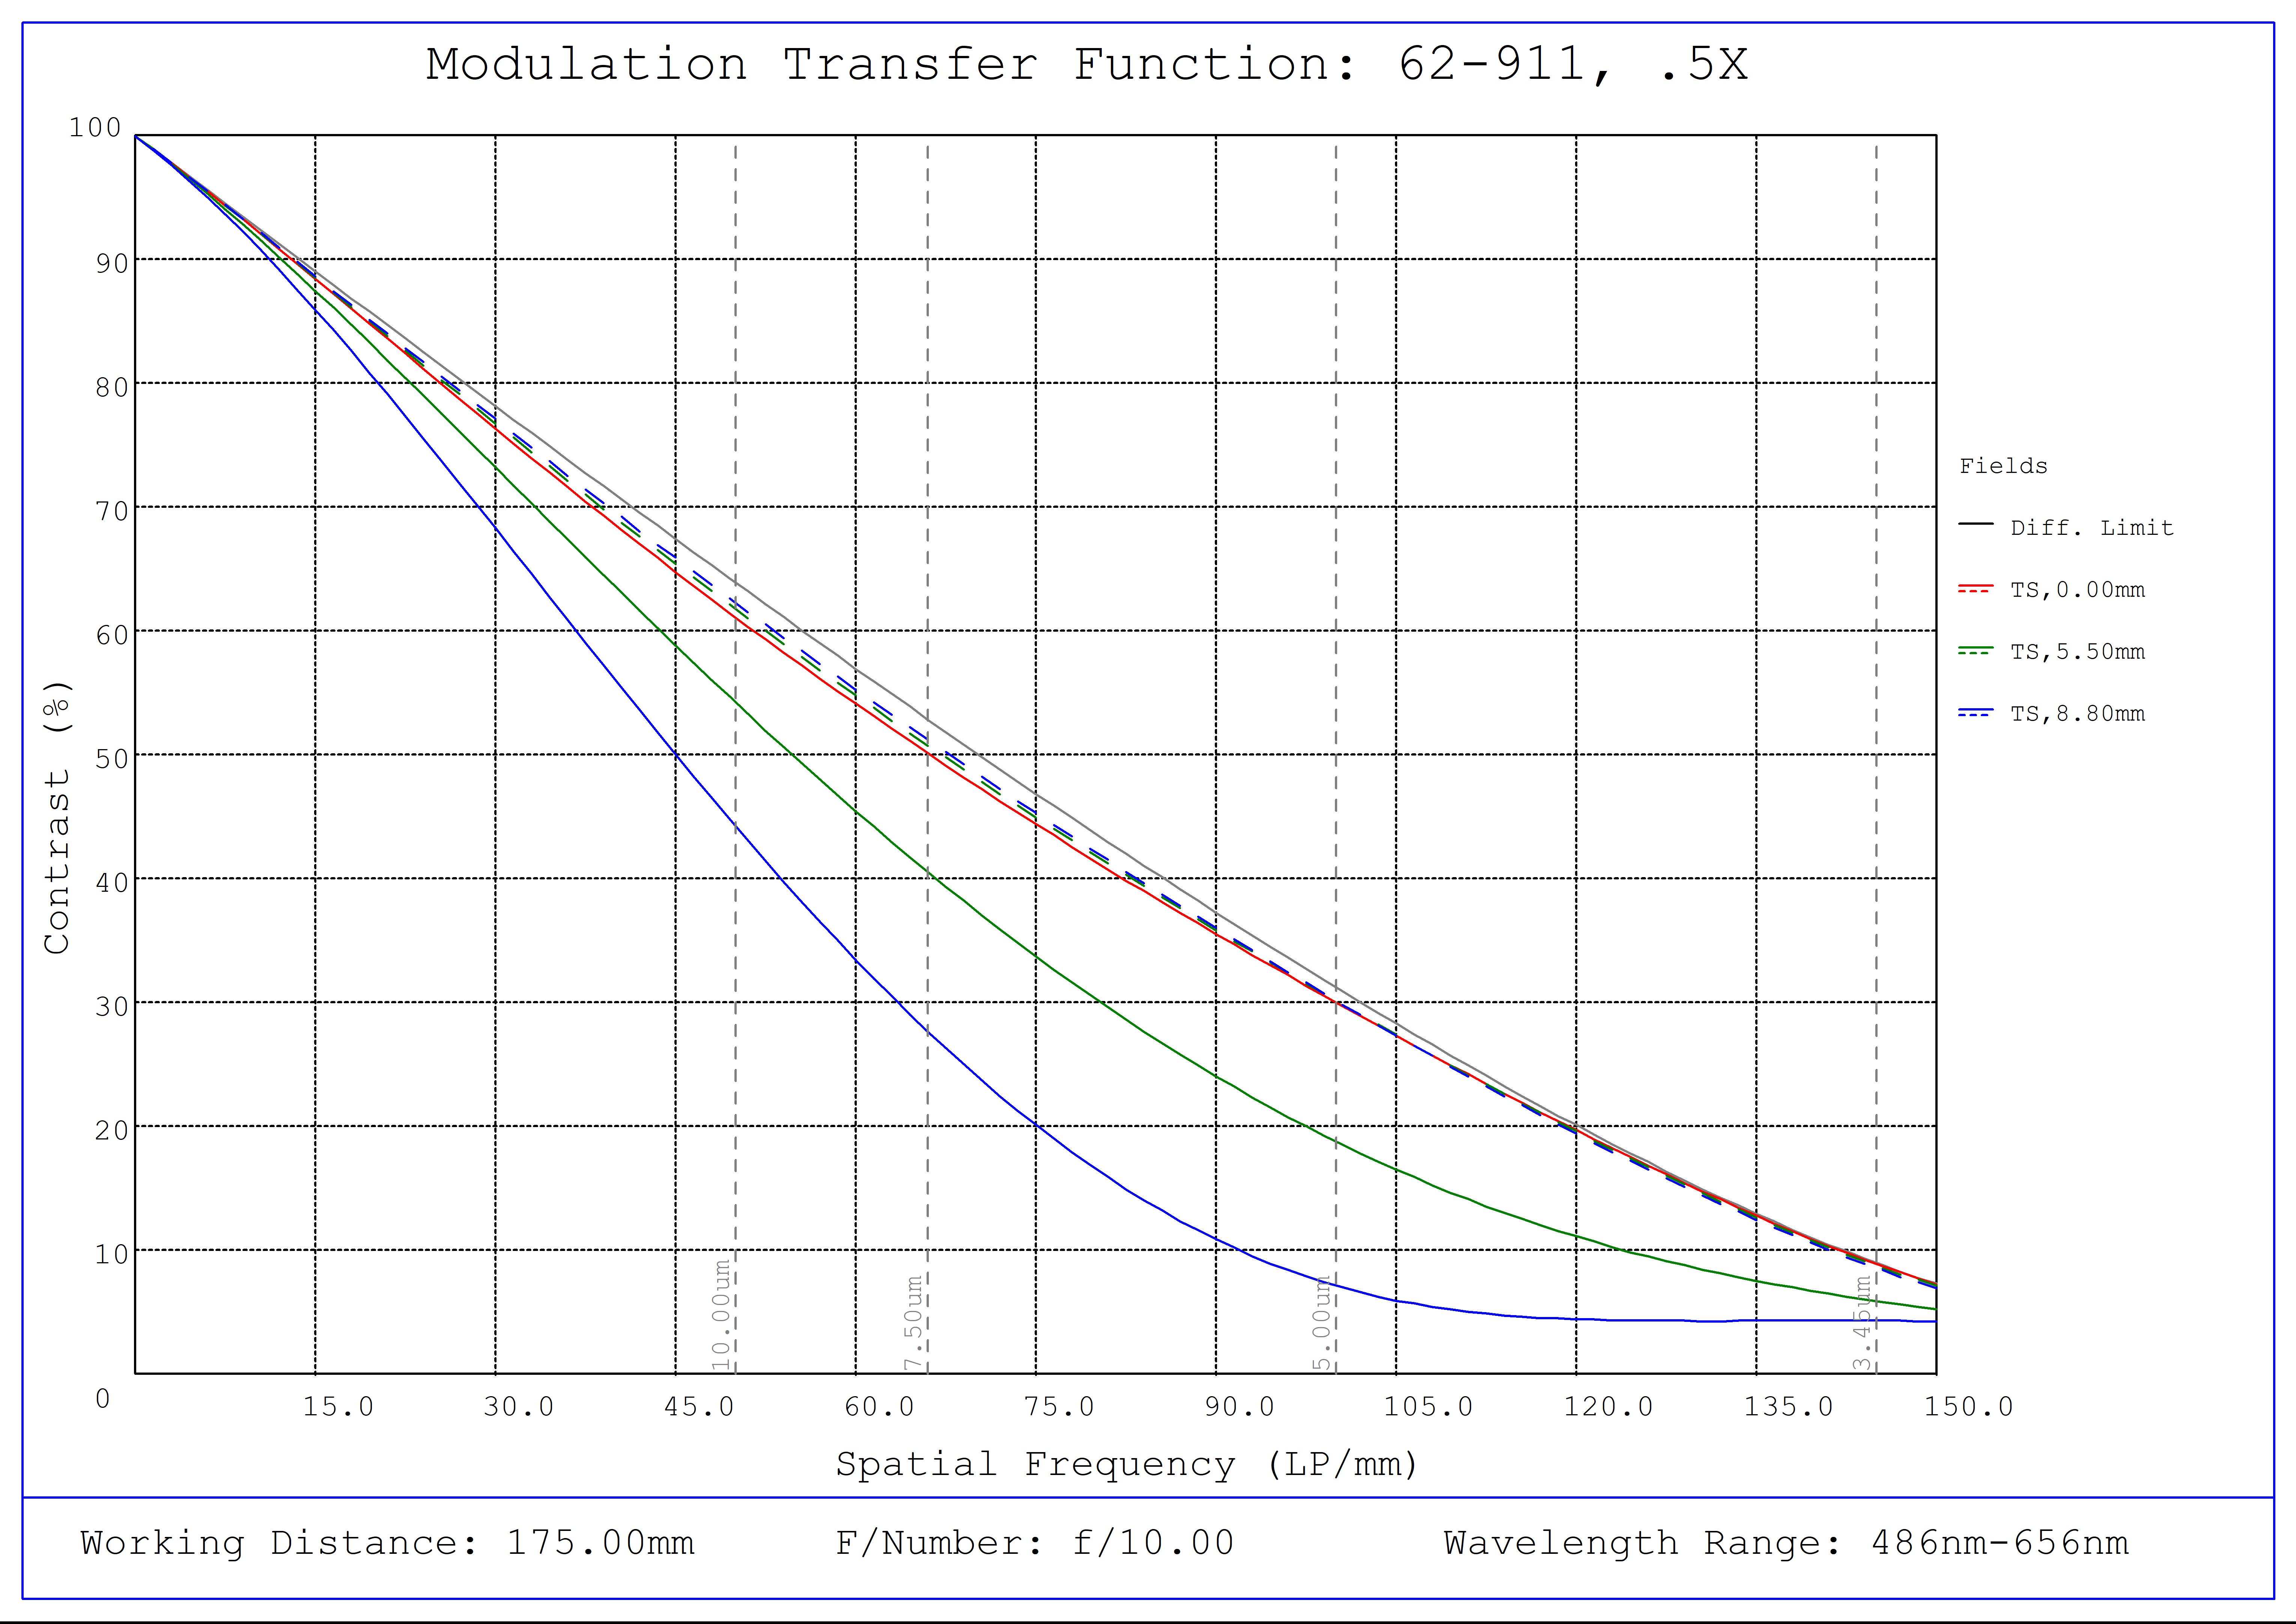 #62-911, 0.5X CobaltTL Telecentric Lens, Modulated Transfer Function (MTF) Plot, 175mm Working Distance, f10